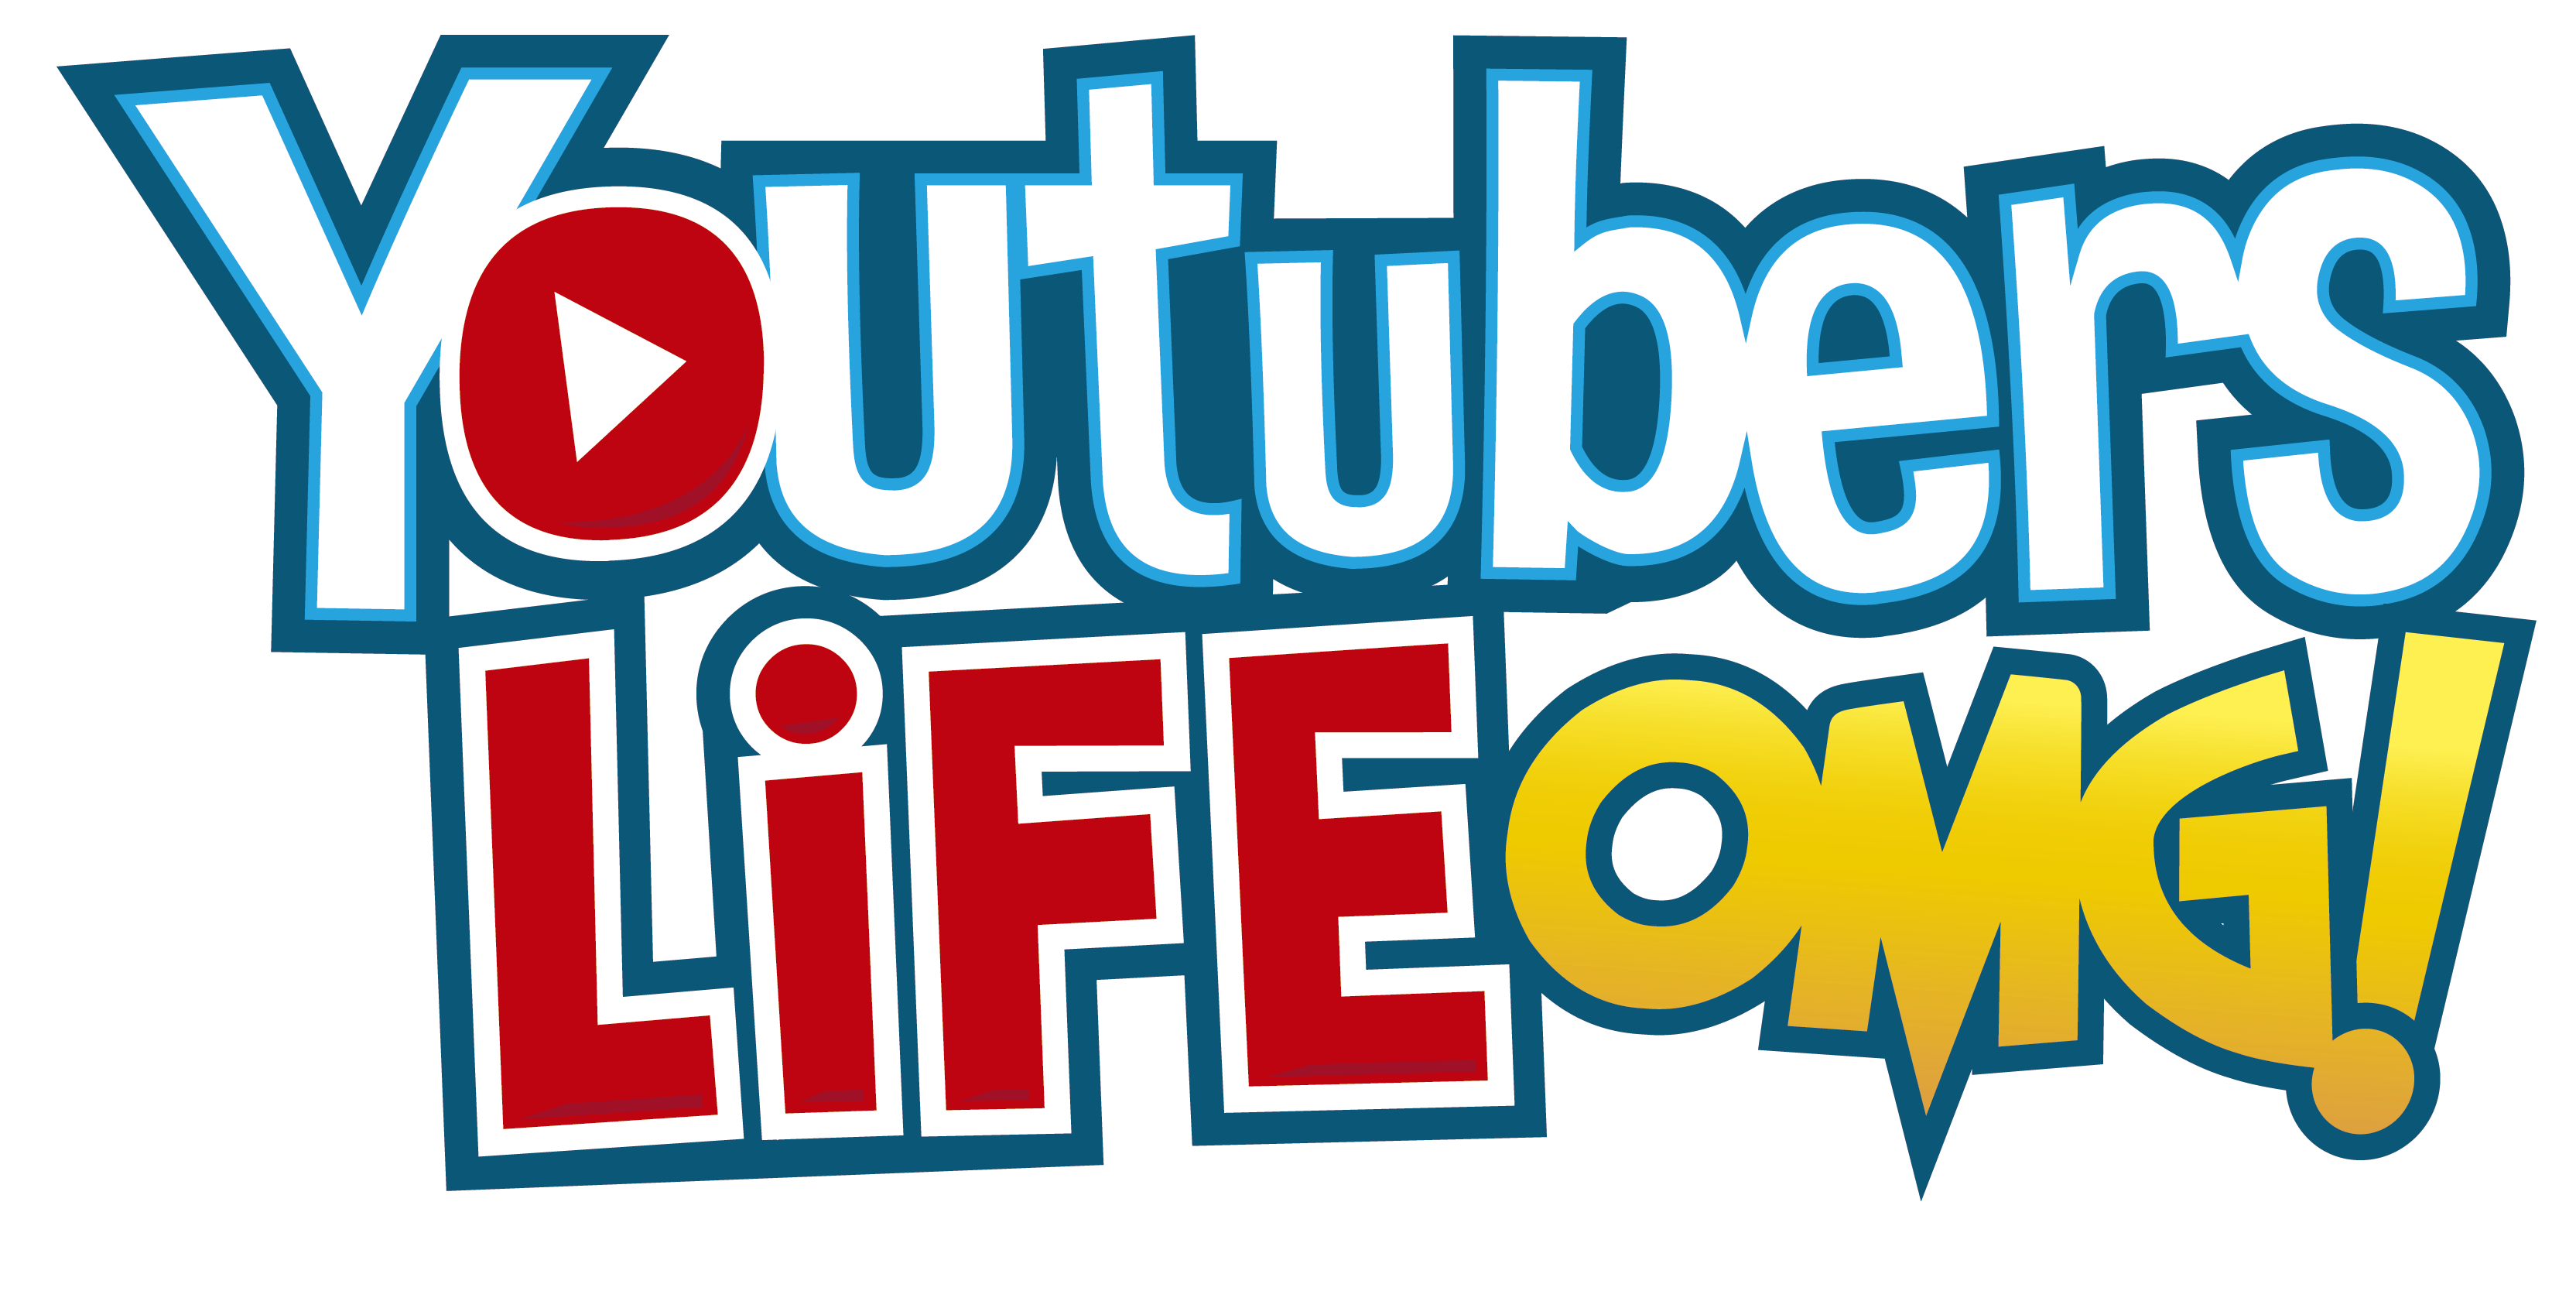  rs Life OMG! (Xbox One) : Video Games